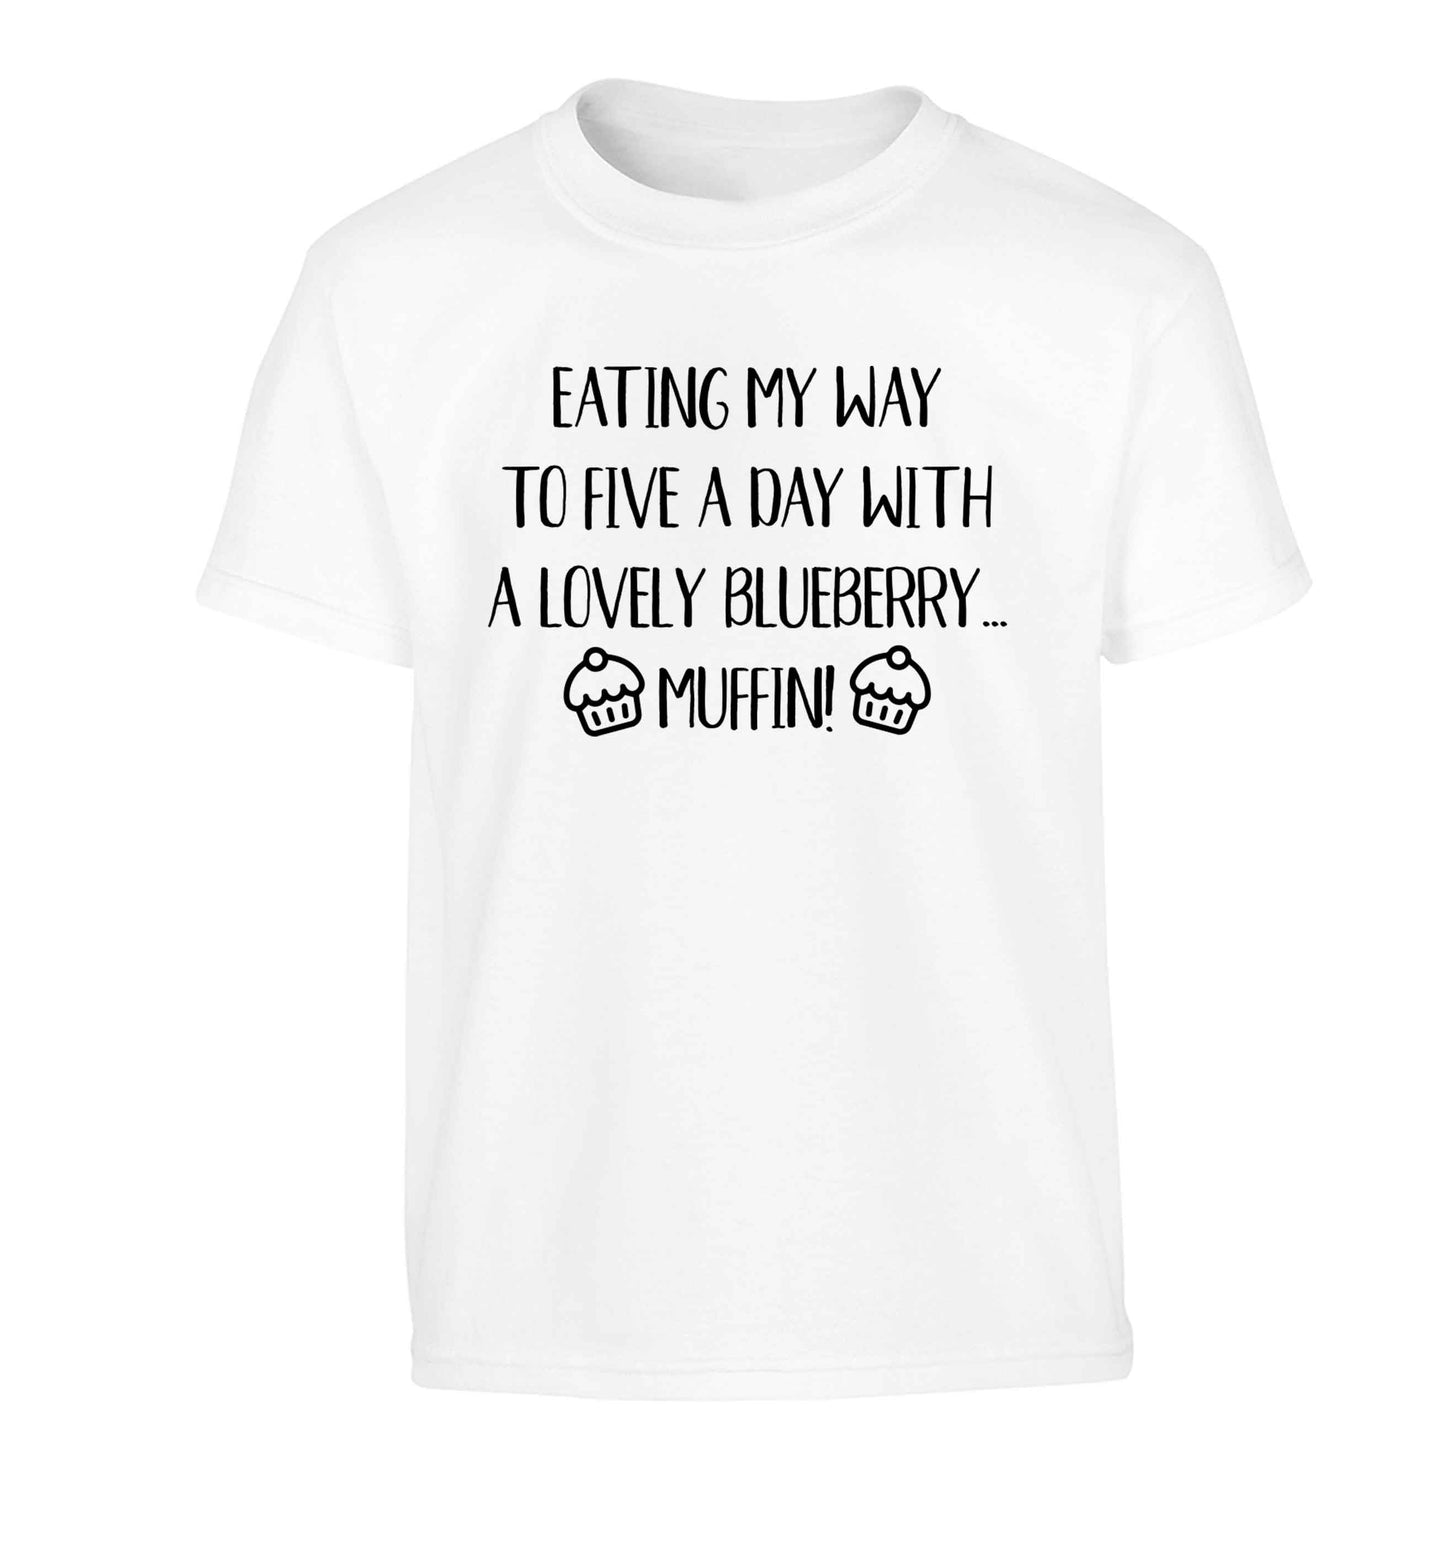 Eating my way to five a day with a lovely blueberry muffin Children's white Tshirt 12-13 Years